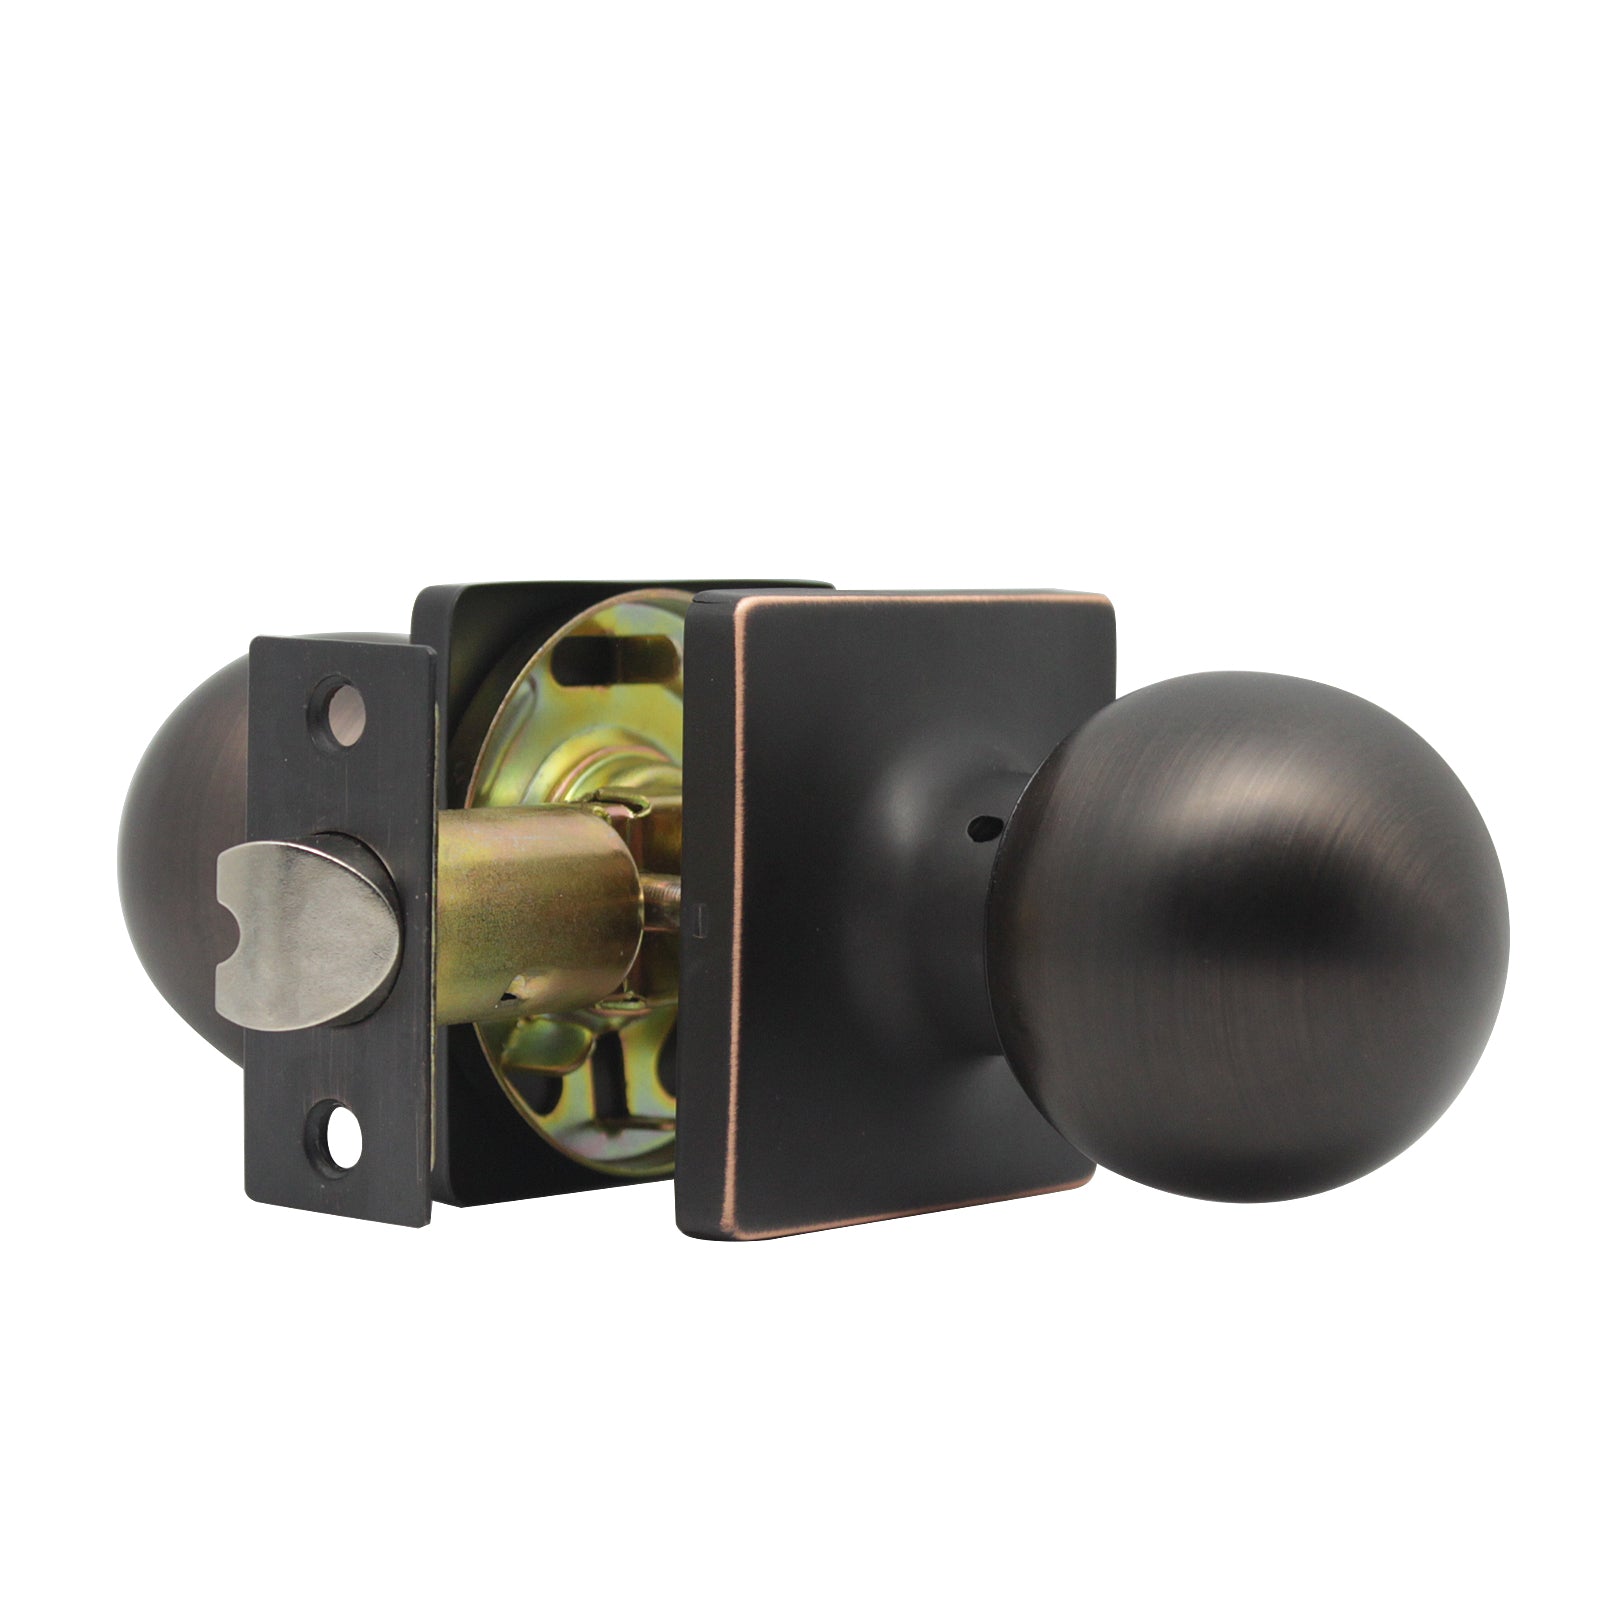 Round Ball Knob with Square Rosette, Interior Passage Door Knobs Oil Rubbed Bronze DLS07ORBPS